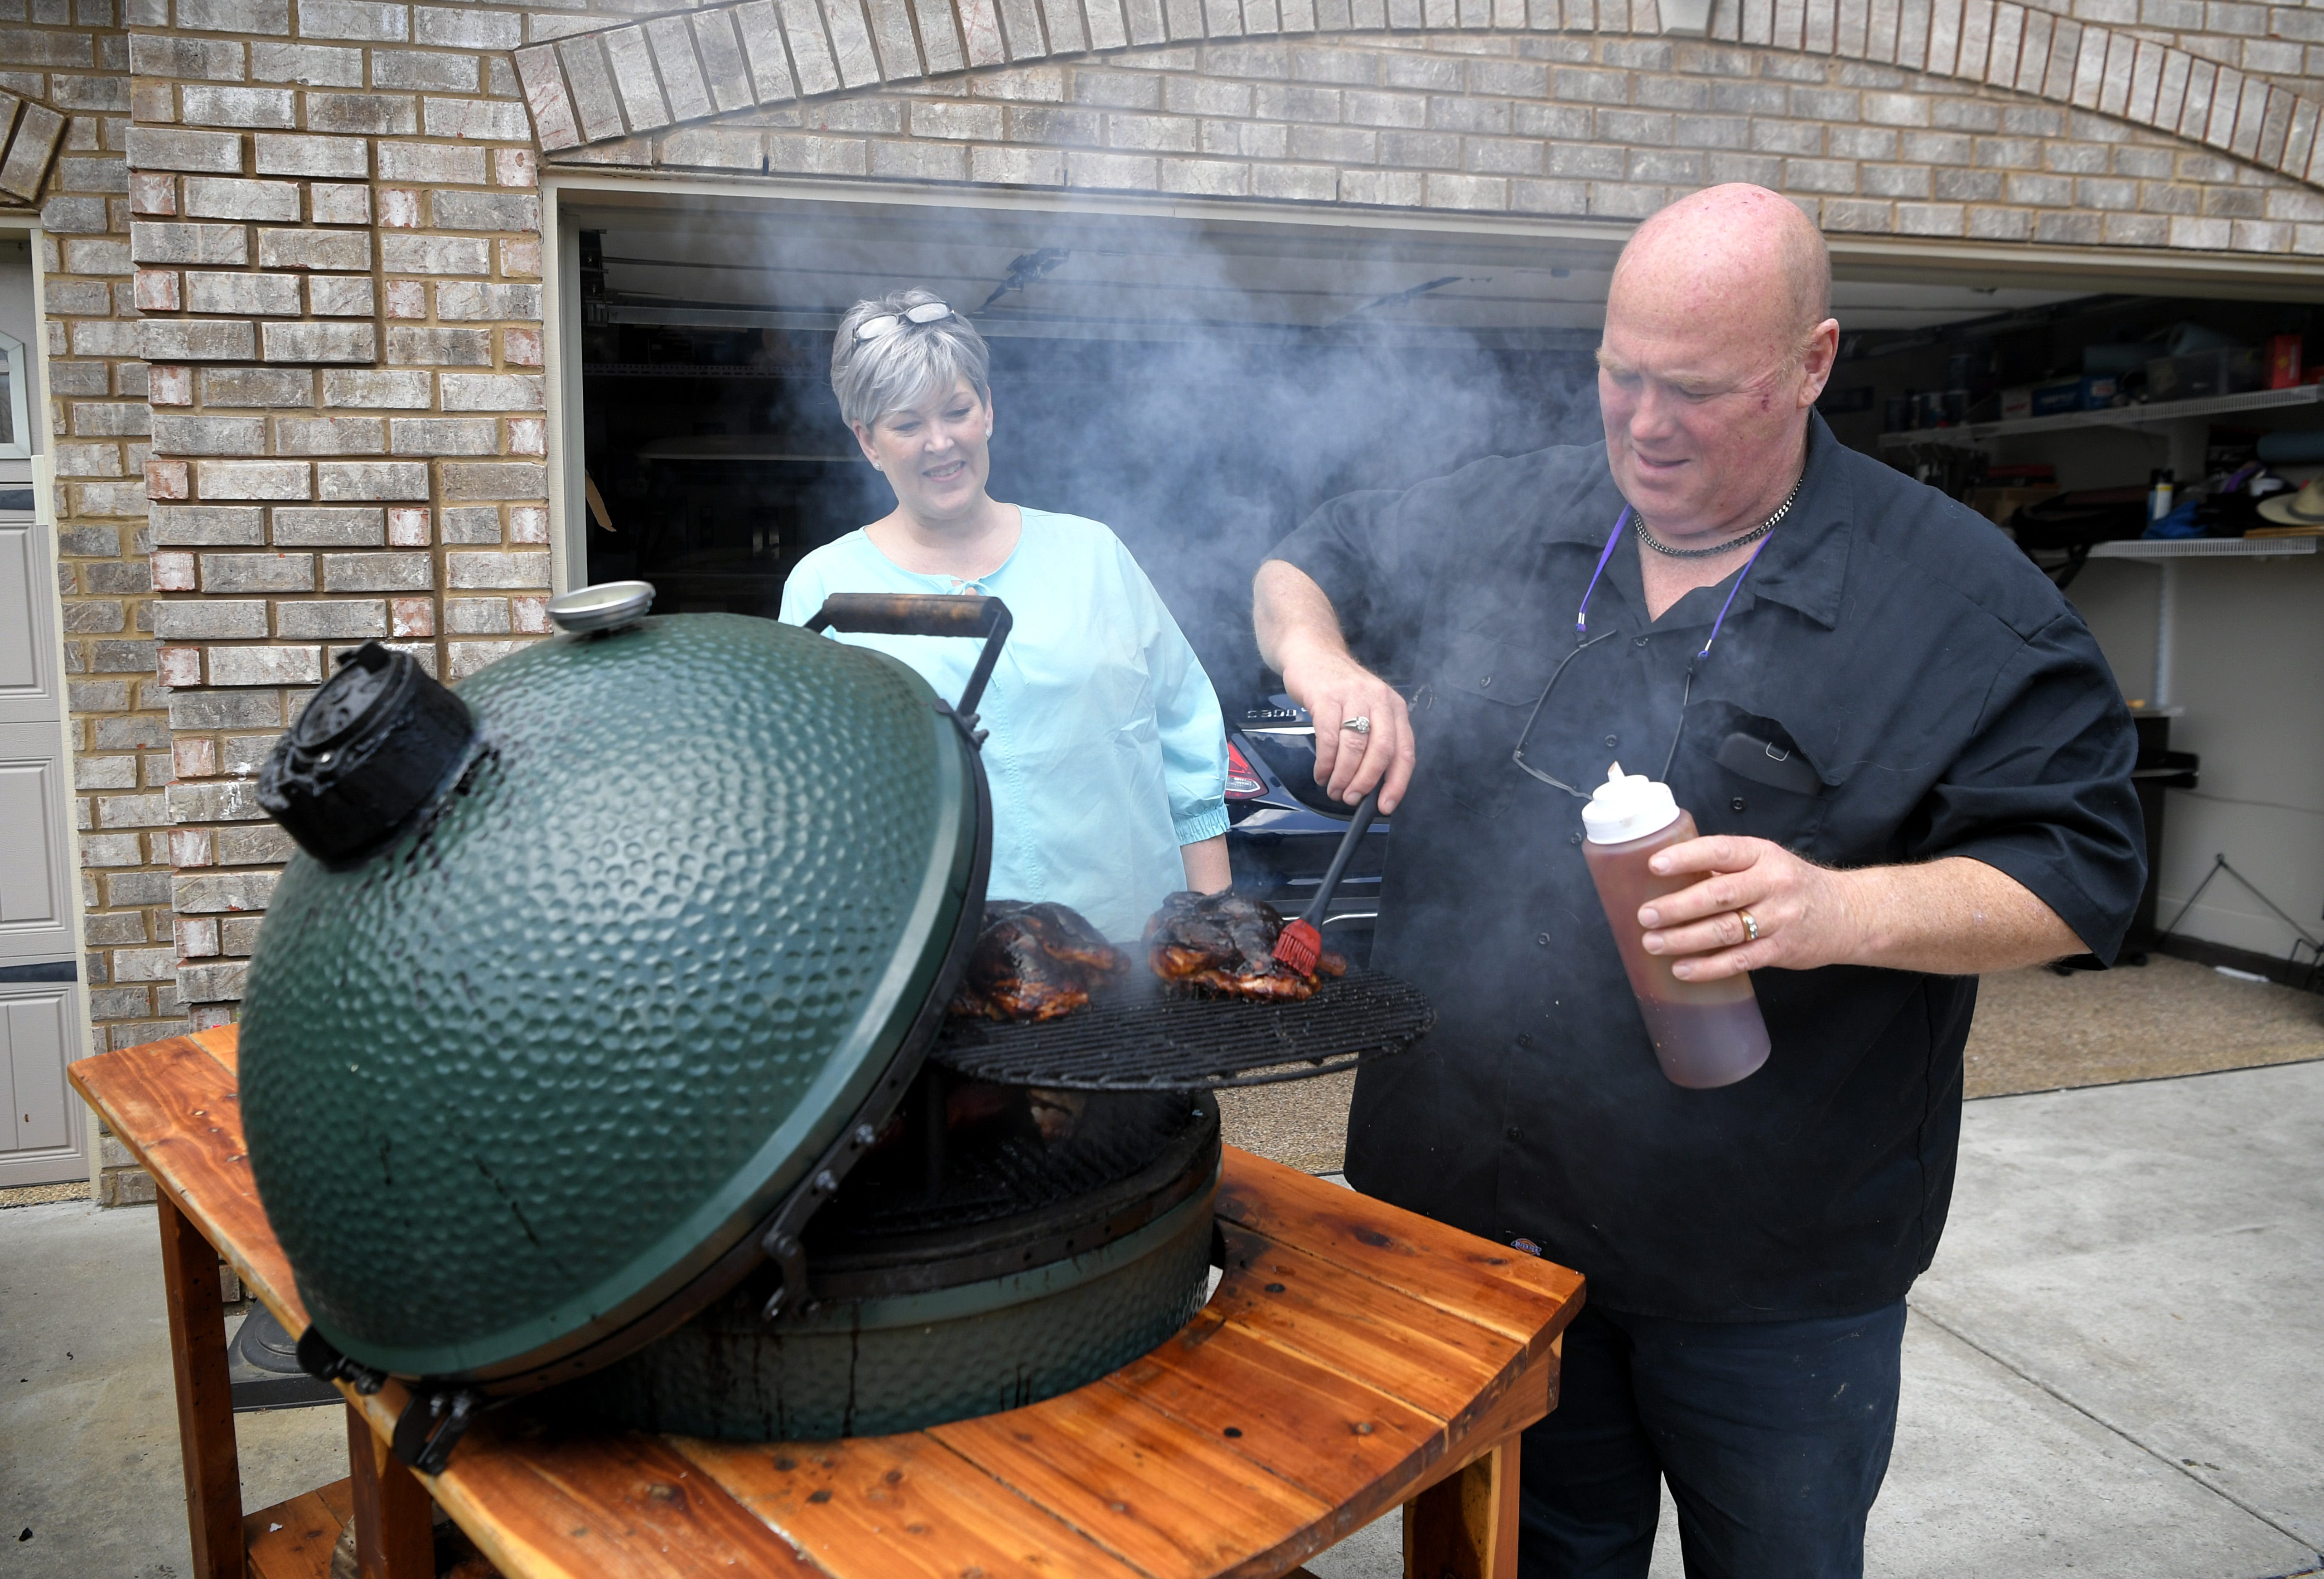 Nelson England, supervisor of operations at Piedmont Natural Gas Co., and his wife, Raven, a real estate agent, have been grilling meals for family, friends and neighbors in their Thompson’s Station driveway.